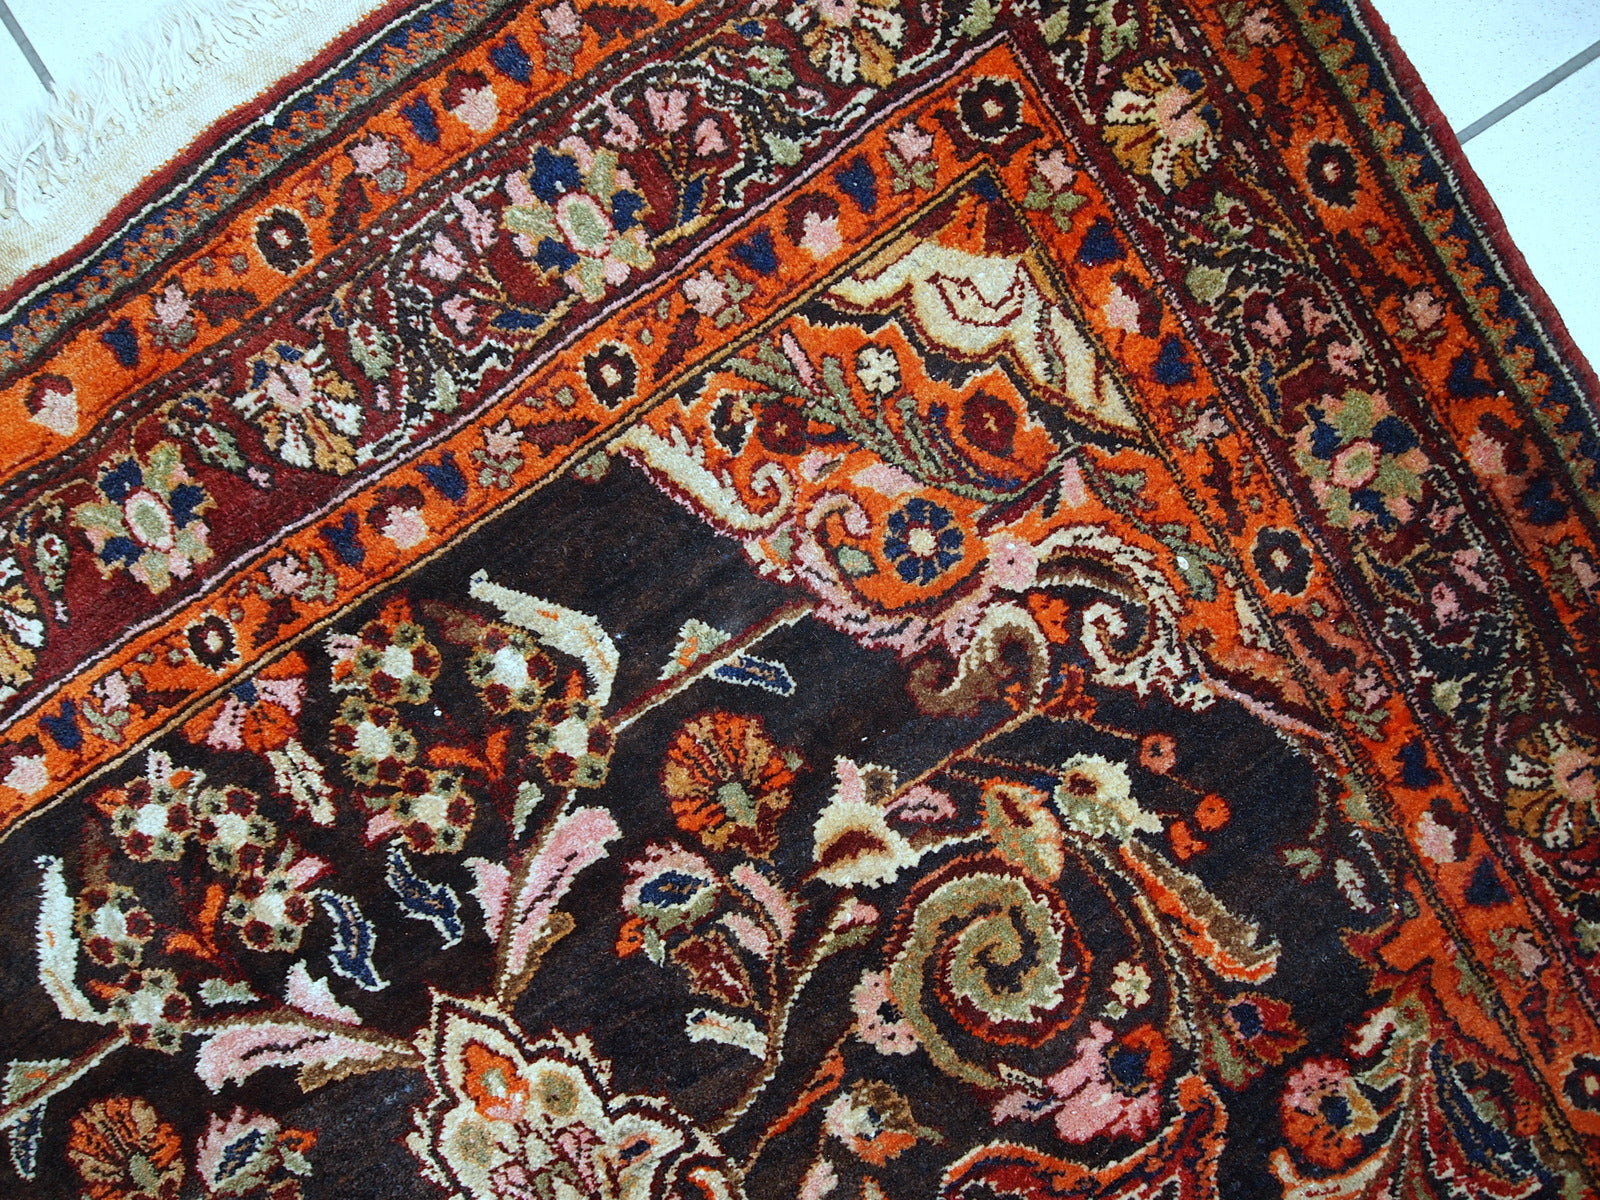 Vintage Persian Tabriz rug in original good condition. It is in chocolate brown and orange wool with some olive and pink shades.